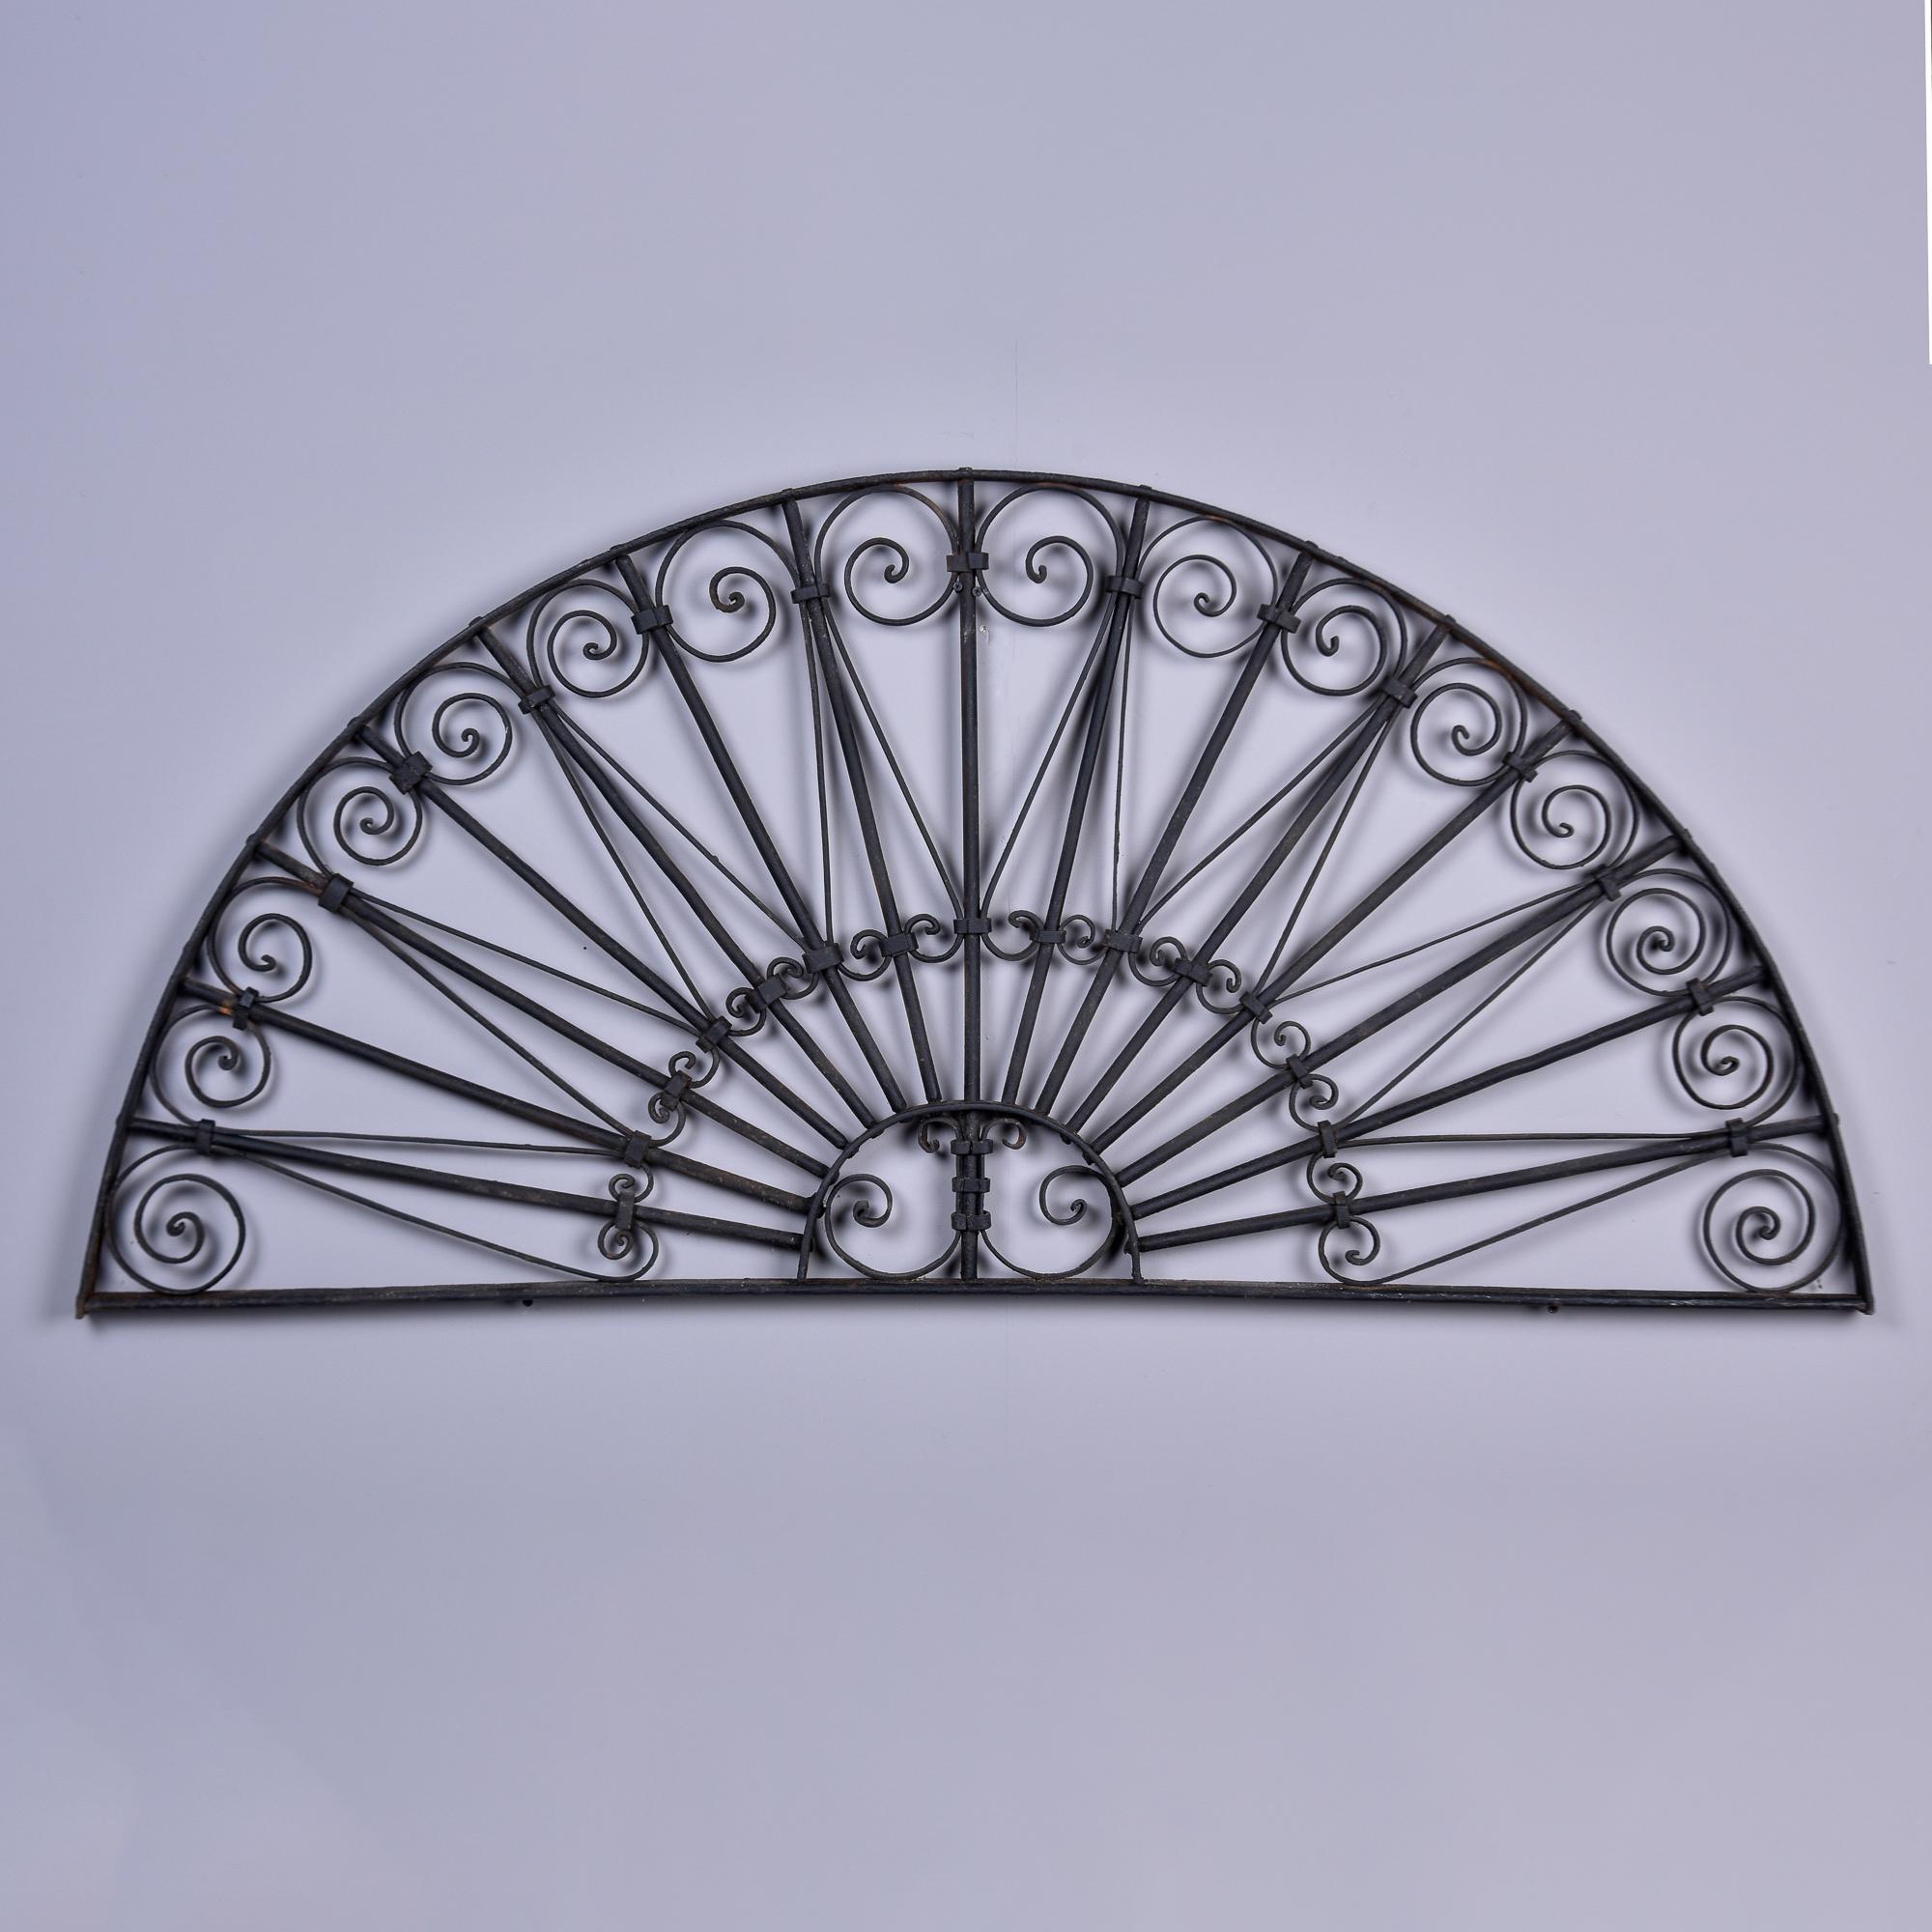 Found in the US, this extra large black iron architectural arch dates from the 1930s and is five feet wide. With an open-fan shape, this piece has a sunburst-style center with pointed rays extending out to a border embellished with scrolled iron.